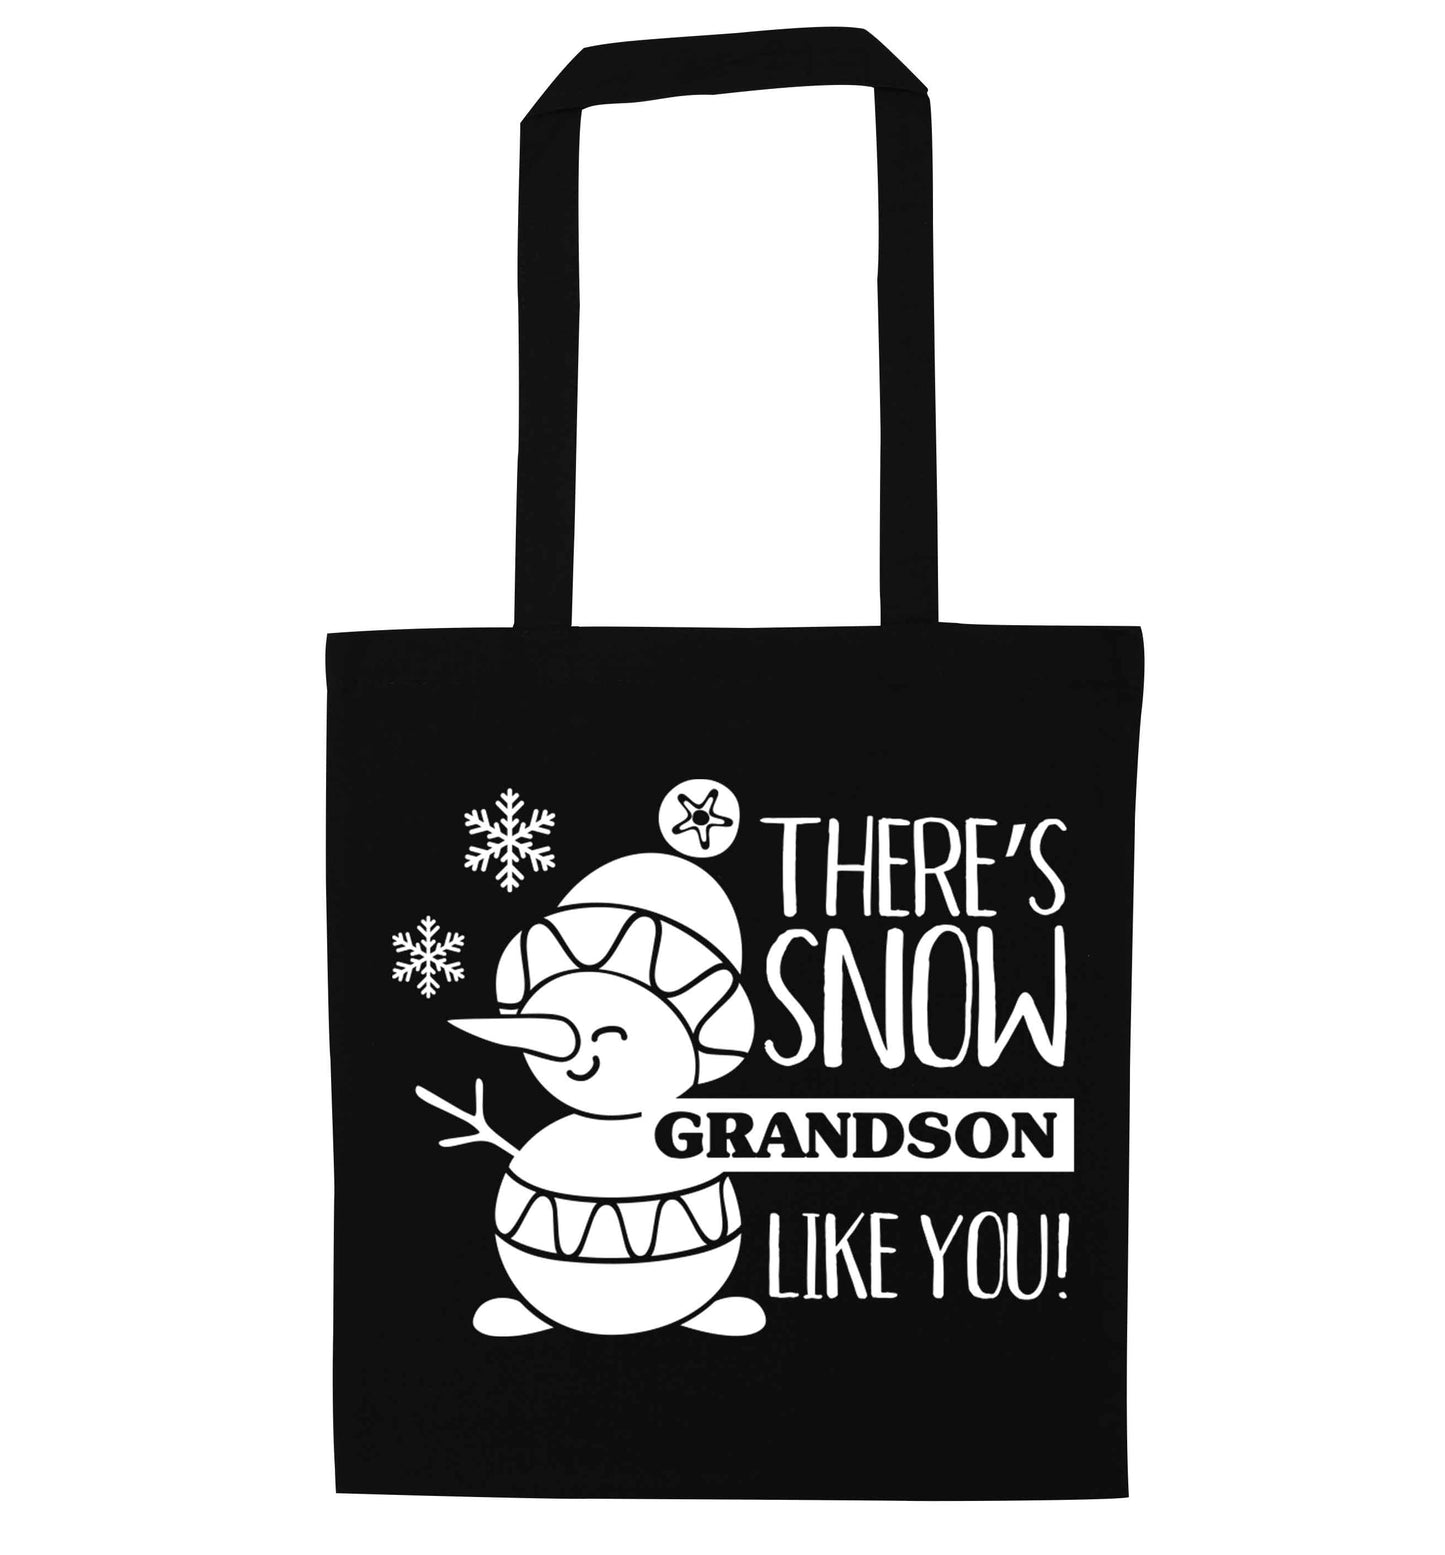 There's snow grandson like you black tote bag